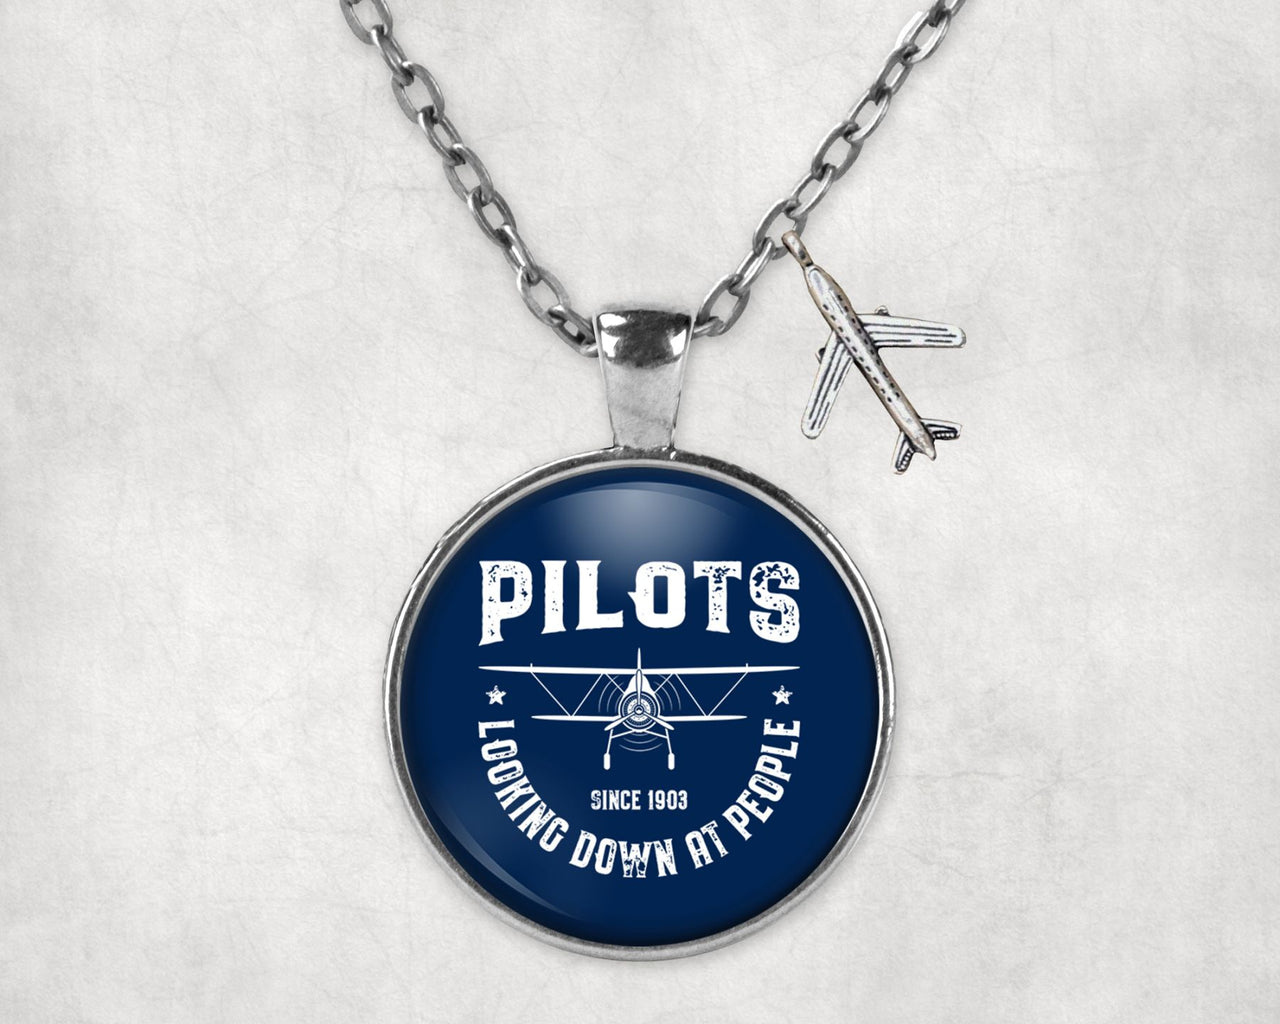 Pilots Looking Down at People Since 1903 Designed Necklaces